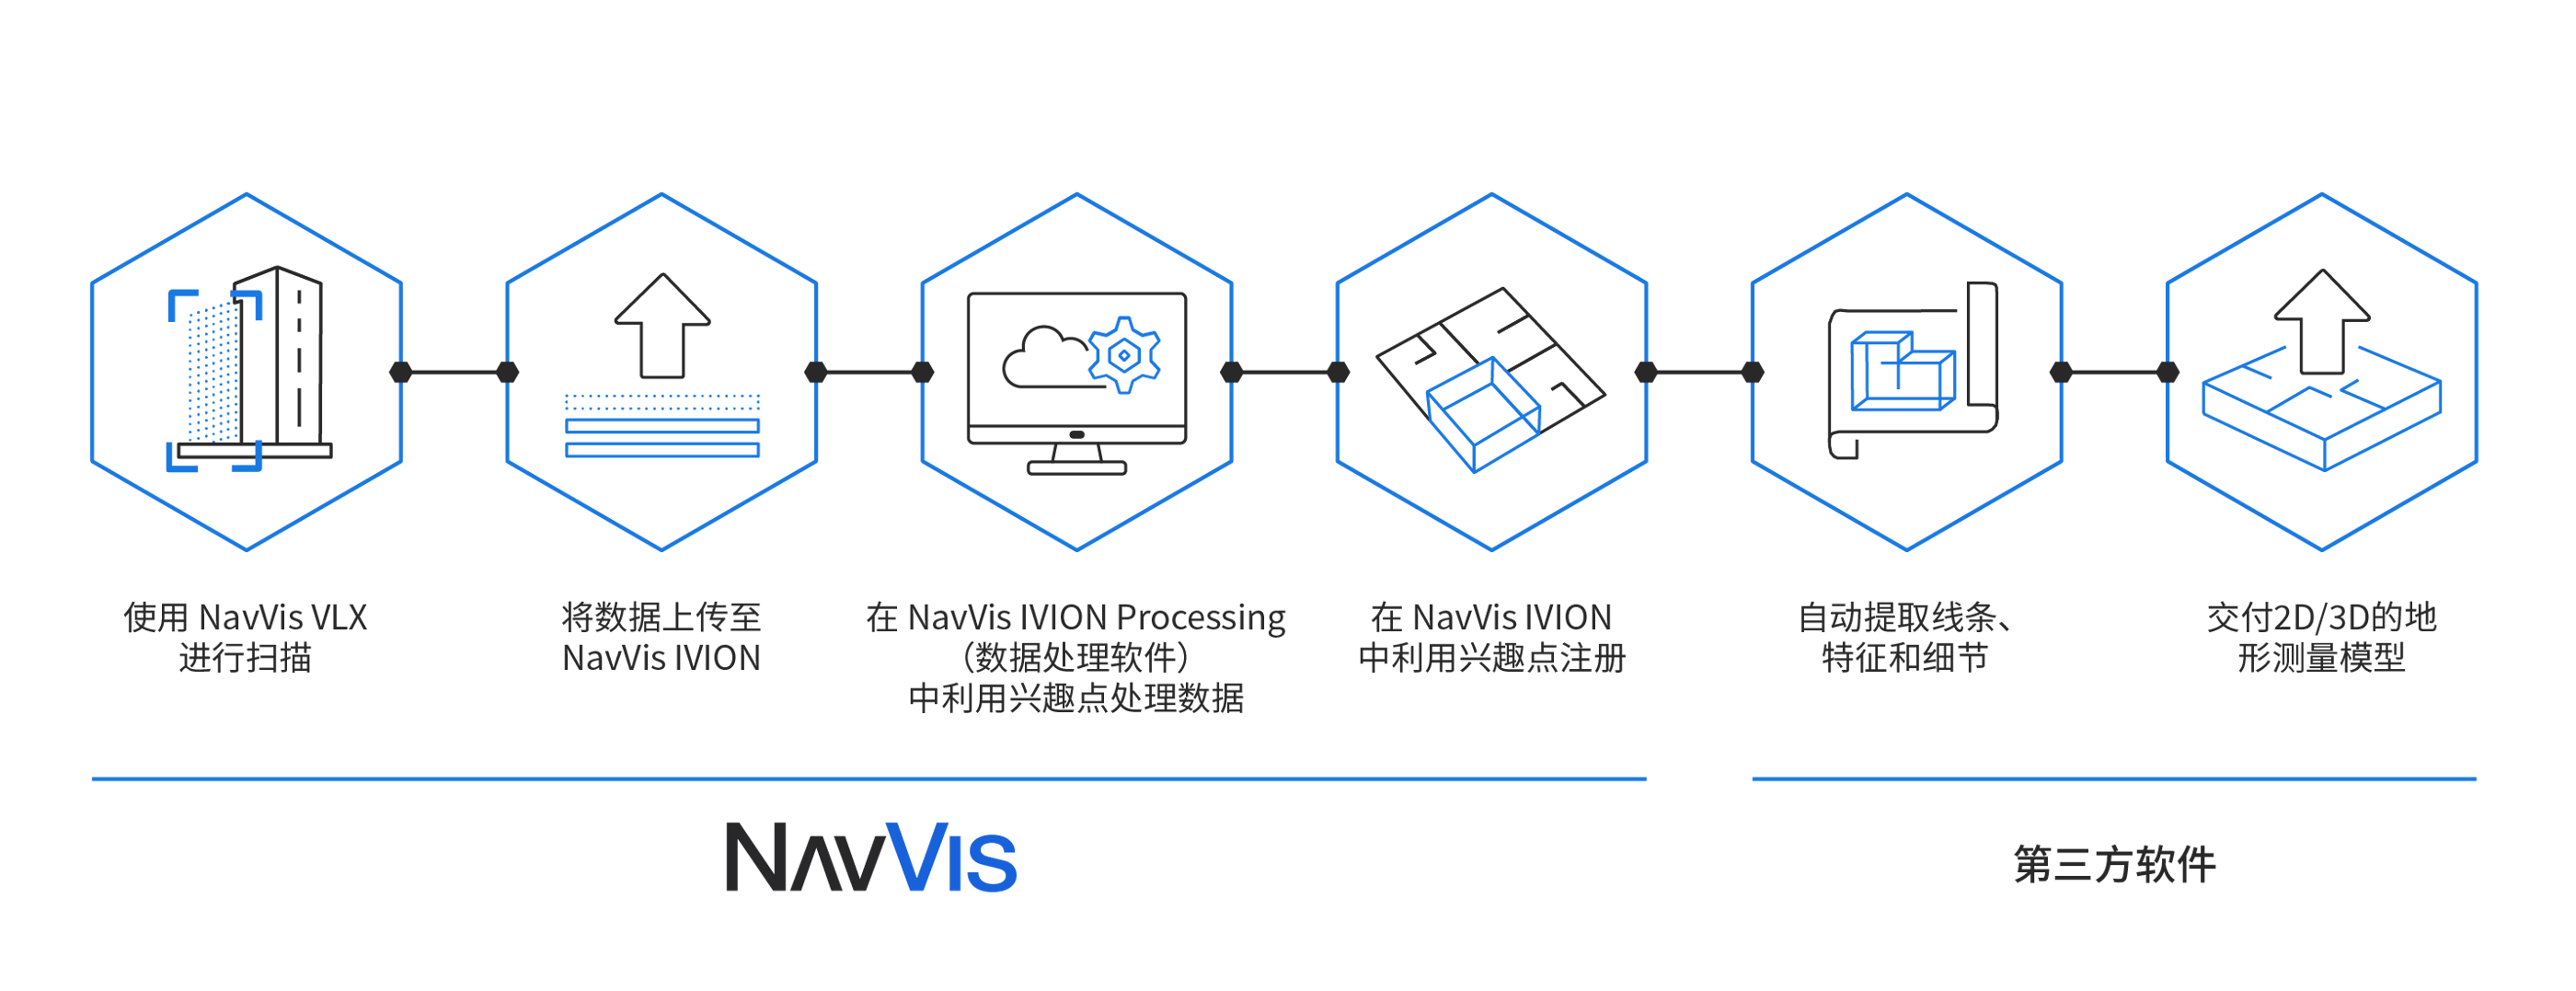 workflow-NavVis-3rd-Party-ZH-2863x1102